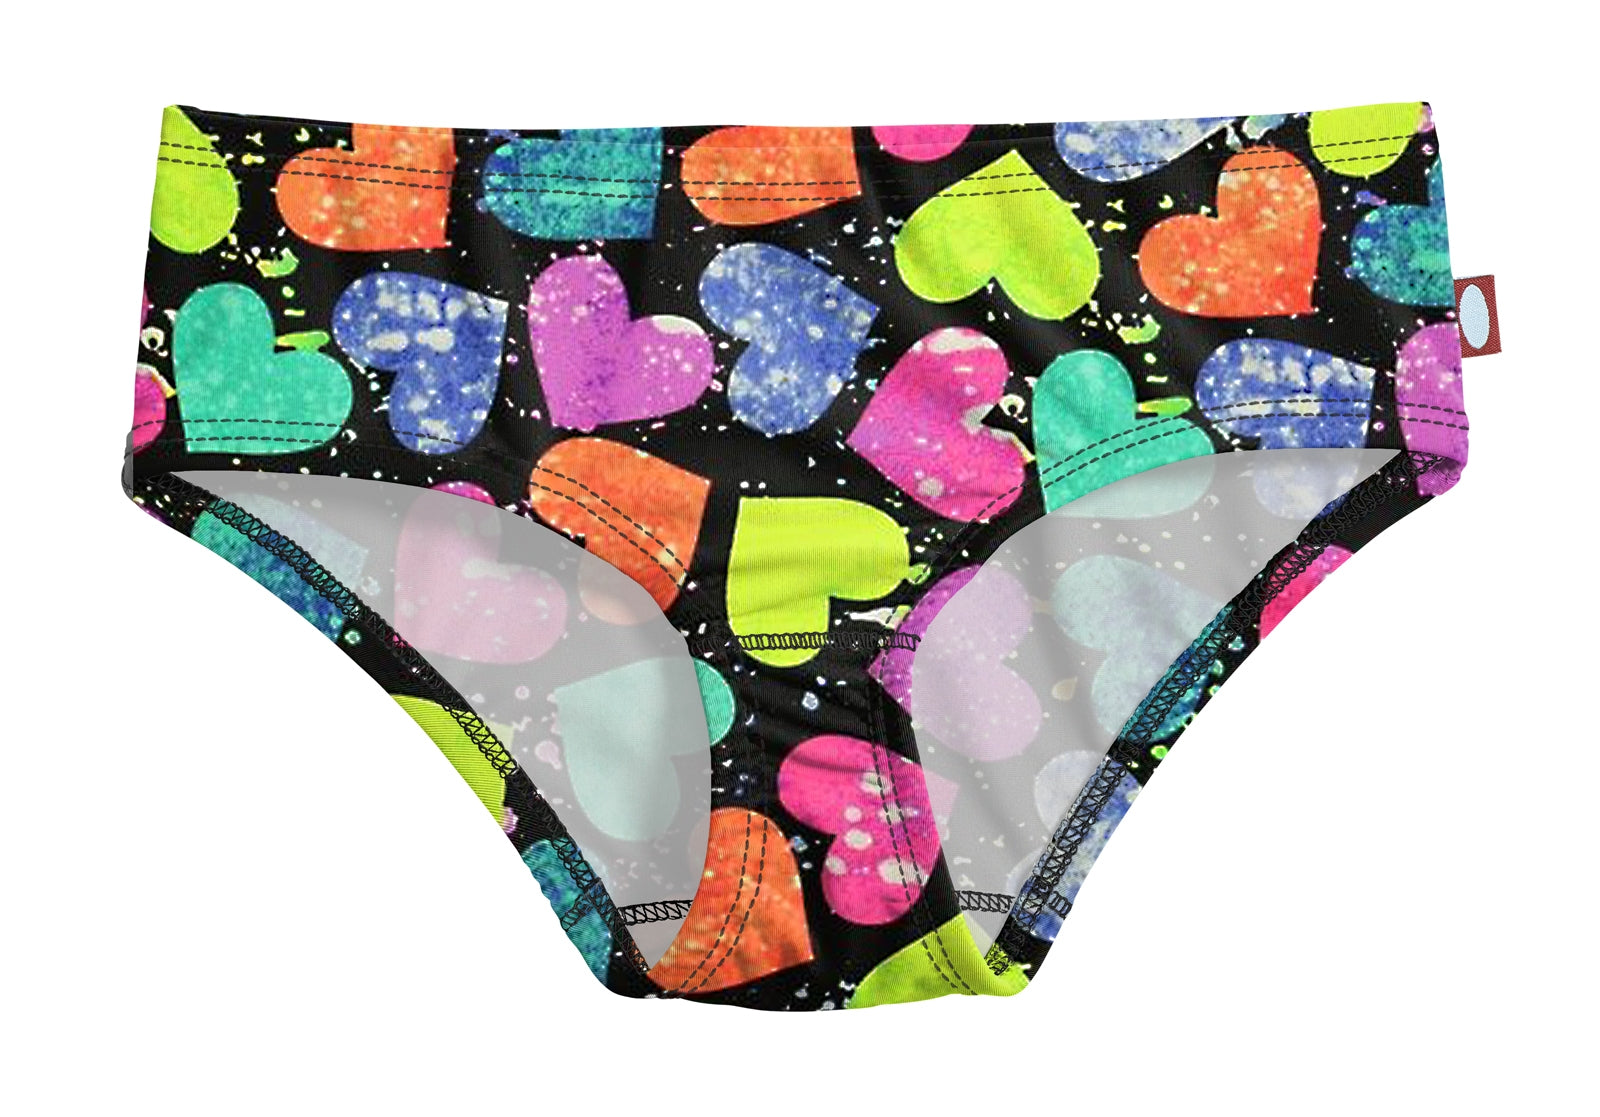 Ladies Multicolor Printed Cotton Panty, Size: Medium at Rs 50